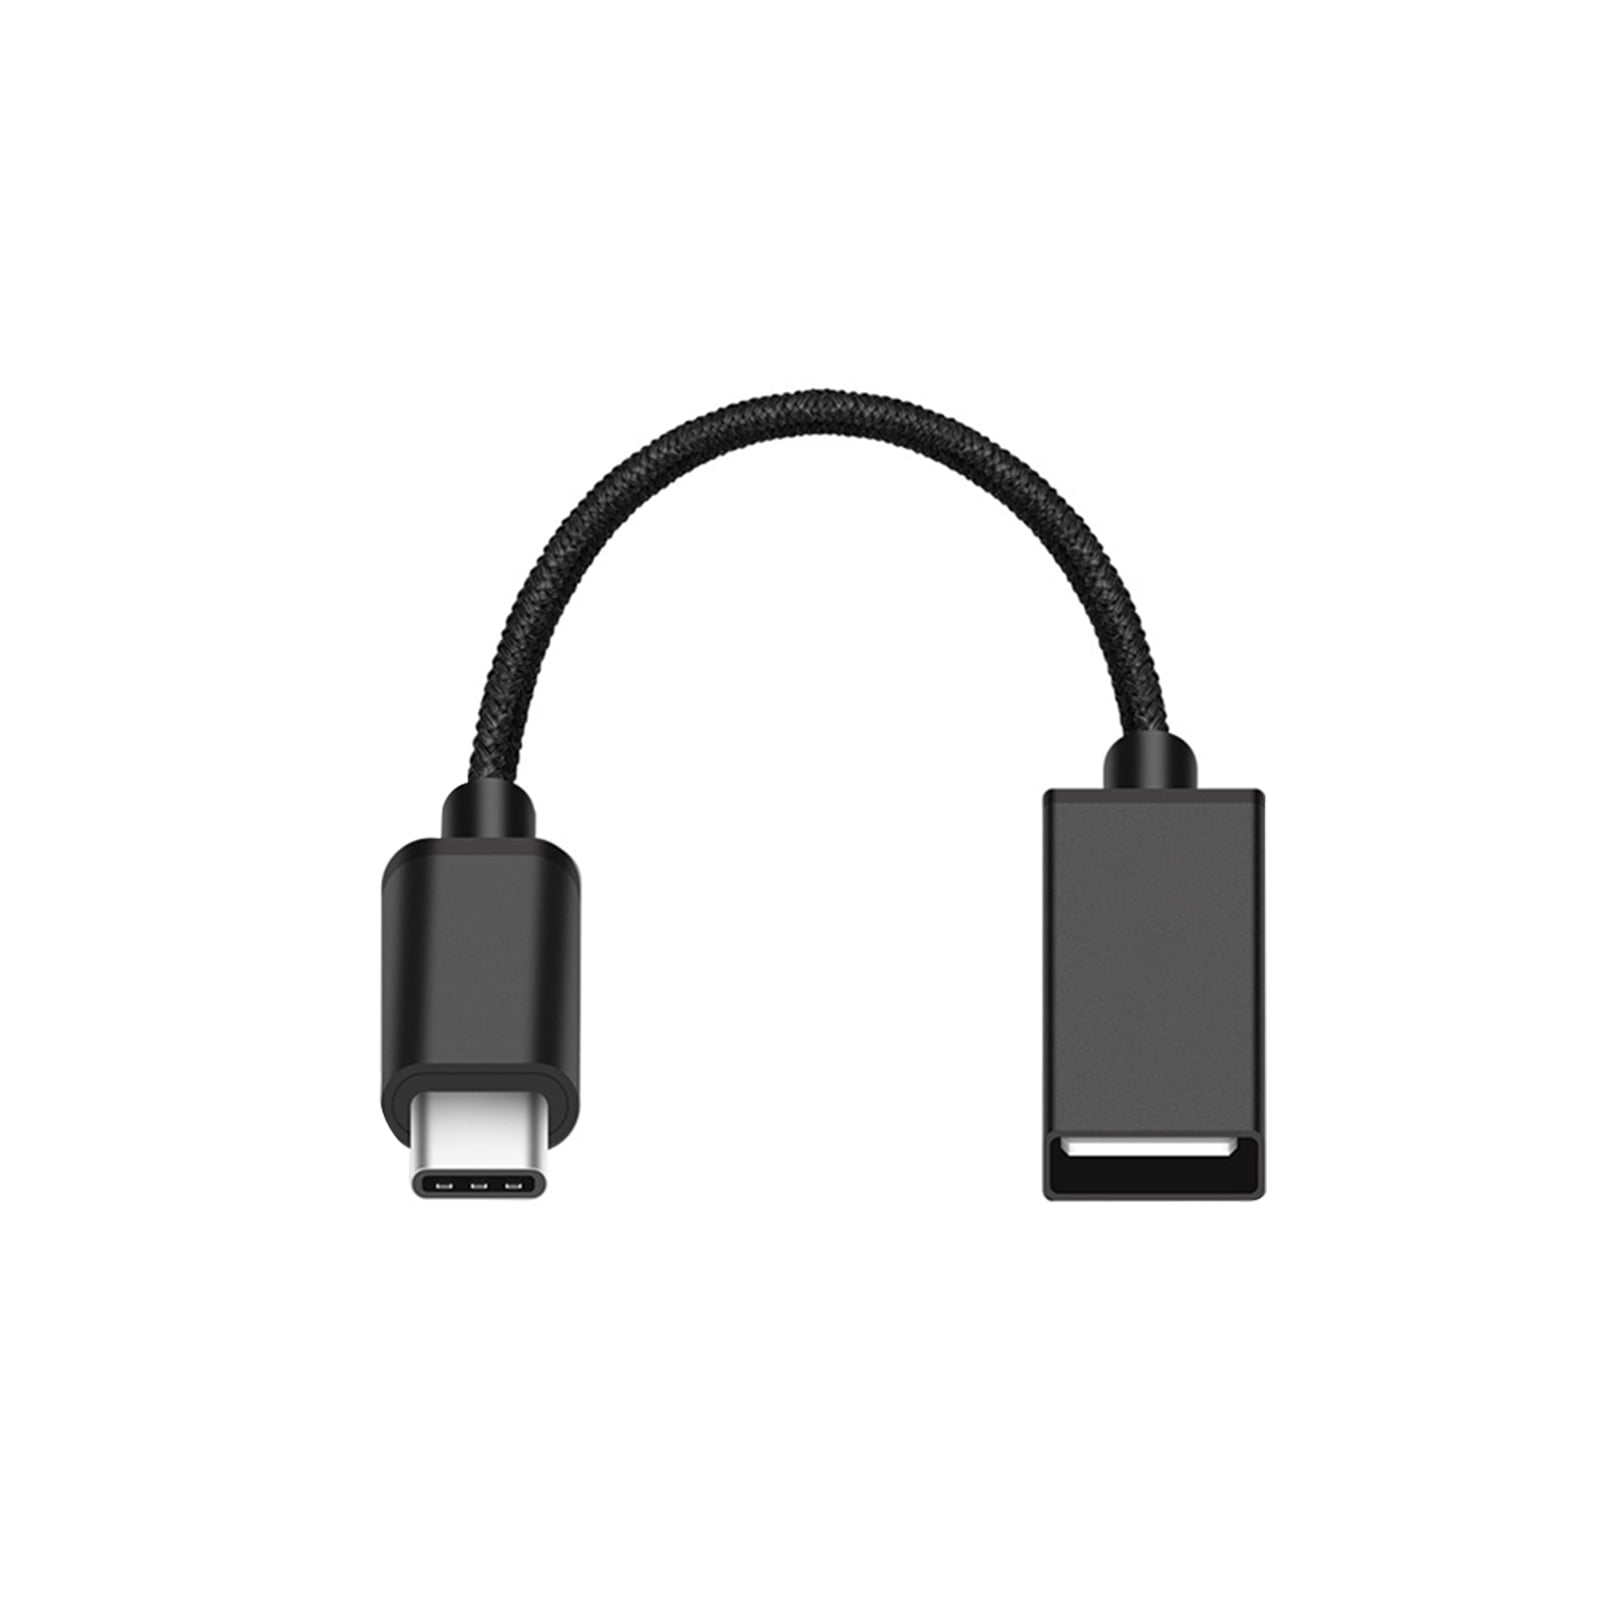 PRO OTG Power Cable Works for Samsung Galaxy Note II AT&T with Power Connect to Any Compatible USB Accessory with MicroUSB 